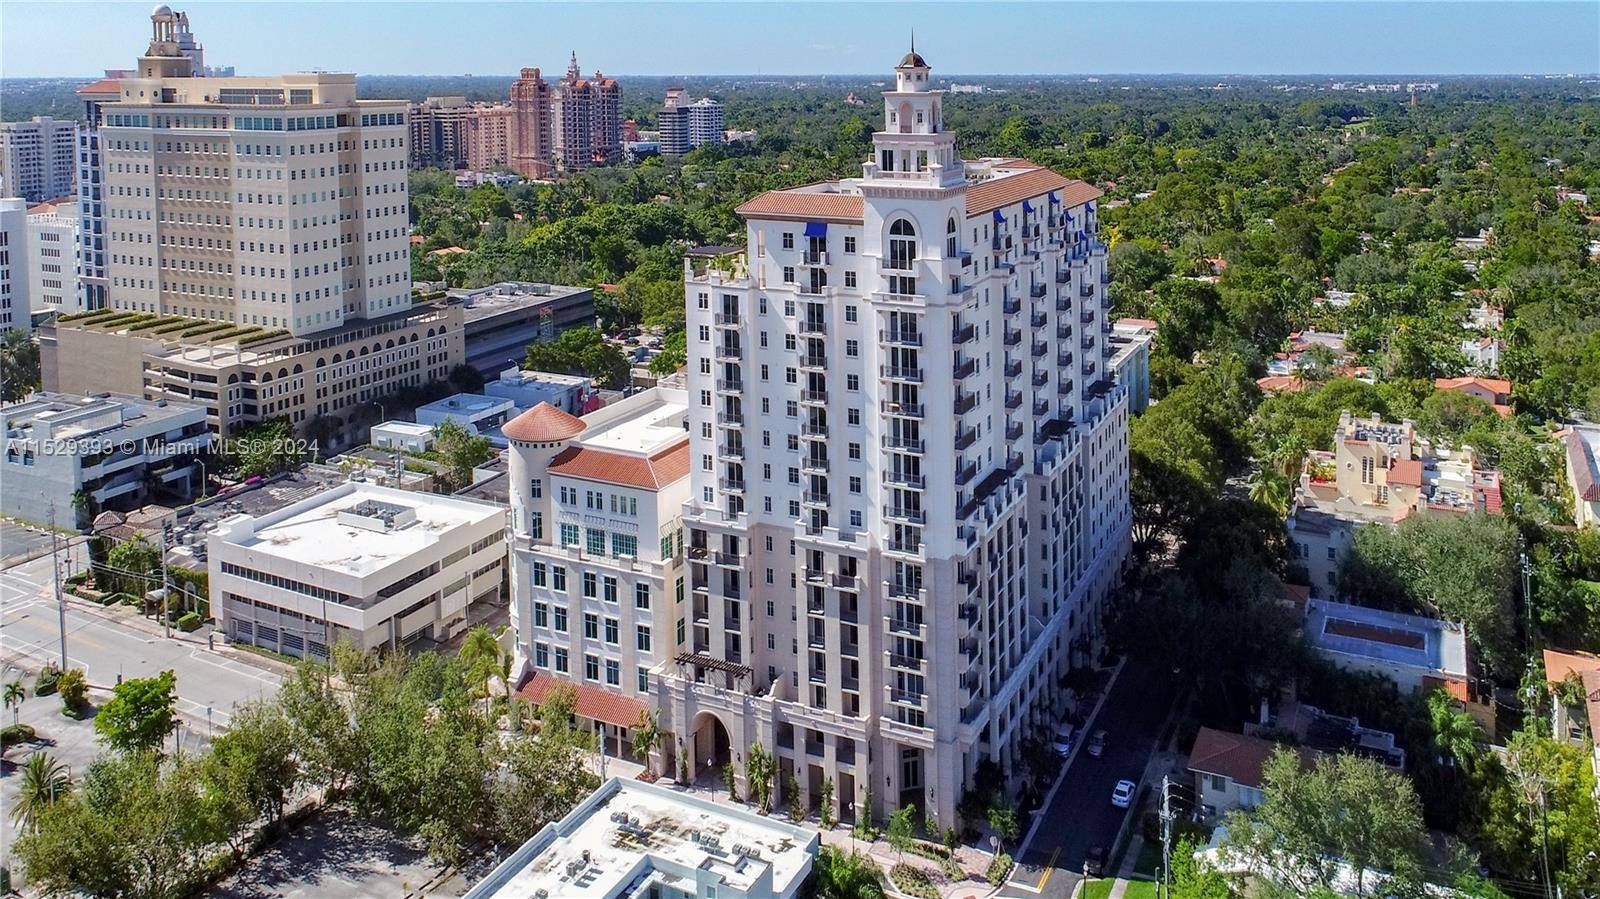 Sofia in Coral Gables boasts a carefully curated collection of luxury amenities, including a full size fitness center, a large outdoor elevated pool, and social lounges overlooking the Coral Gables ...